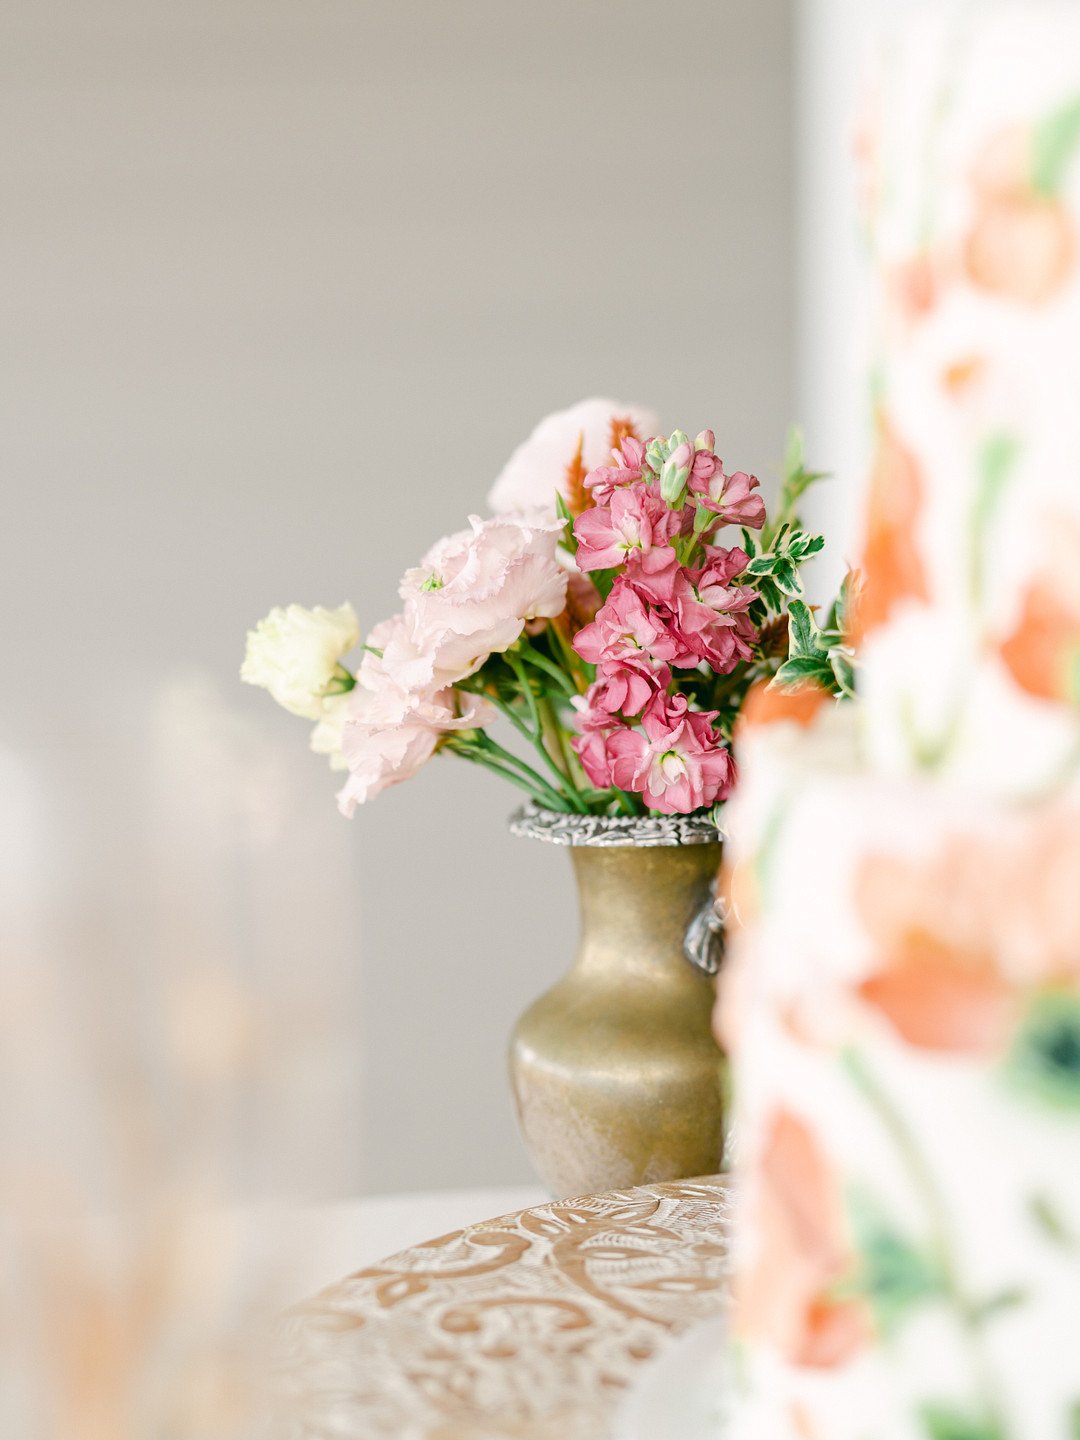 A Southern editorial with a painterly flow, inspired by the impressionist style of Claude Monet_Jessica Blackburn Photography, llc_DSC04981_low.jpg